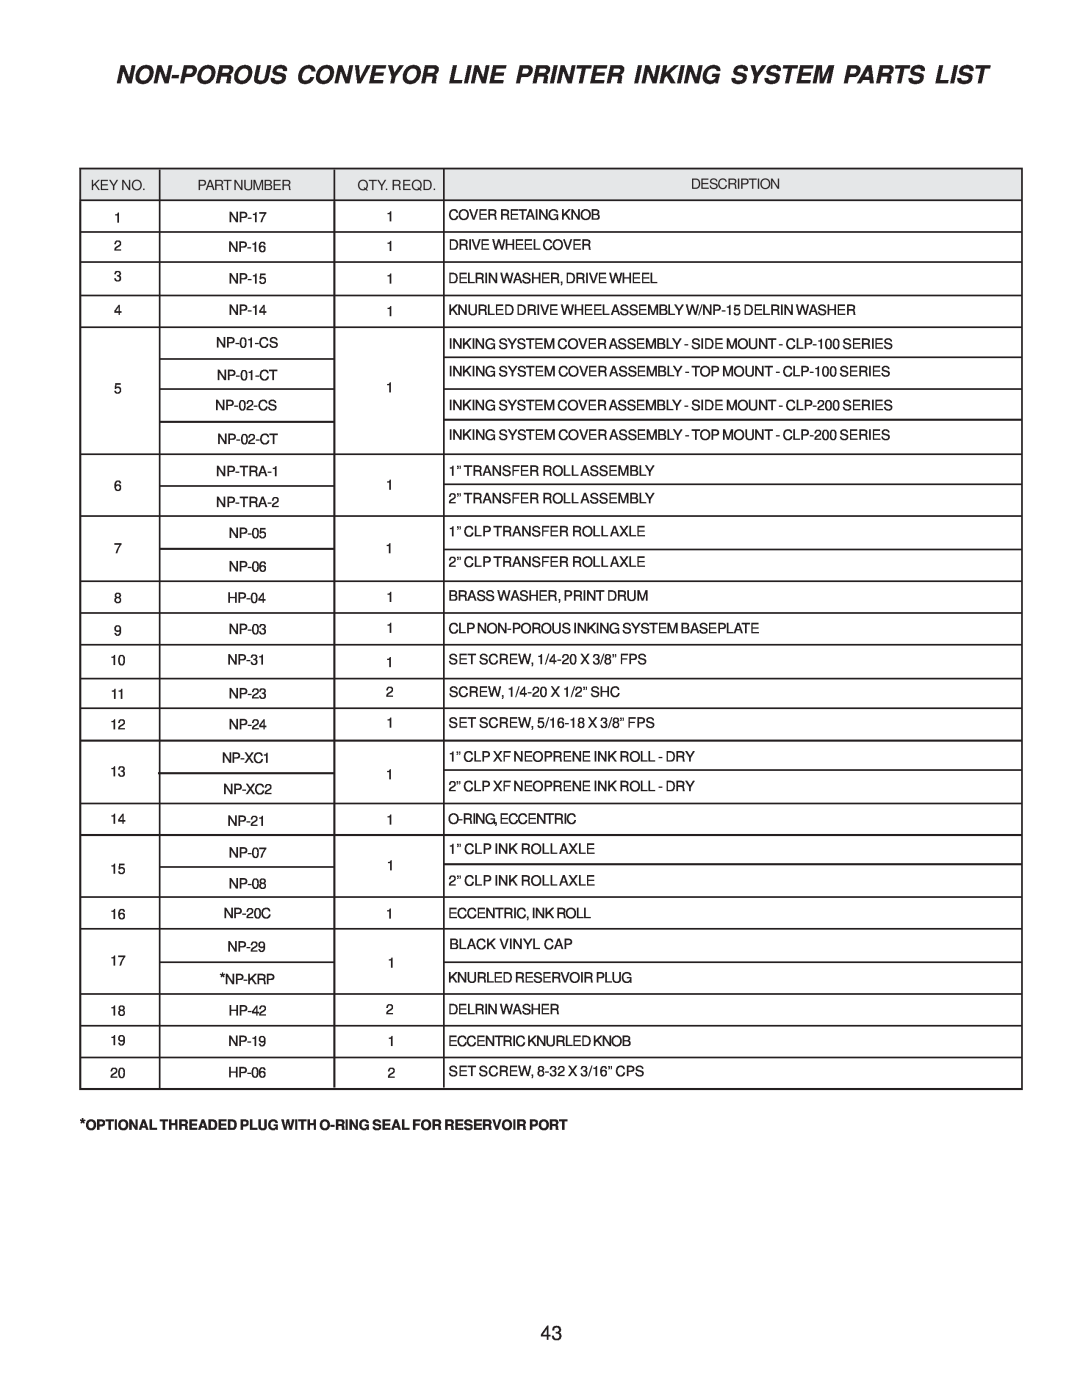 Universal Laser Systems CLP-100NI-NPRT manual Non-Porous Conveyor Line Printer Inking System Parts List 